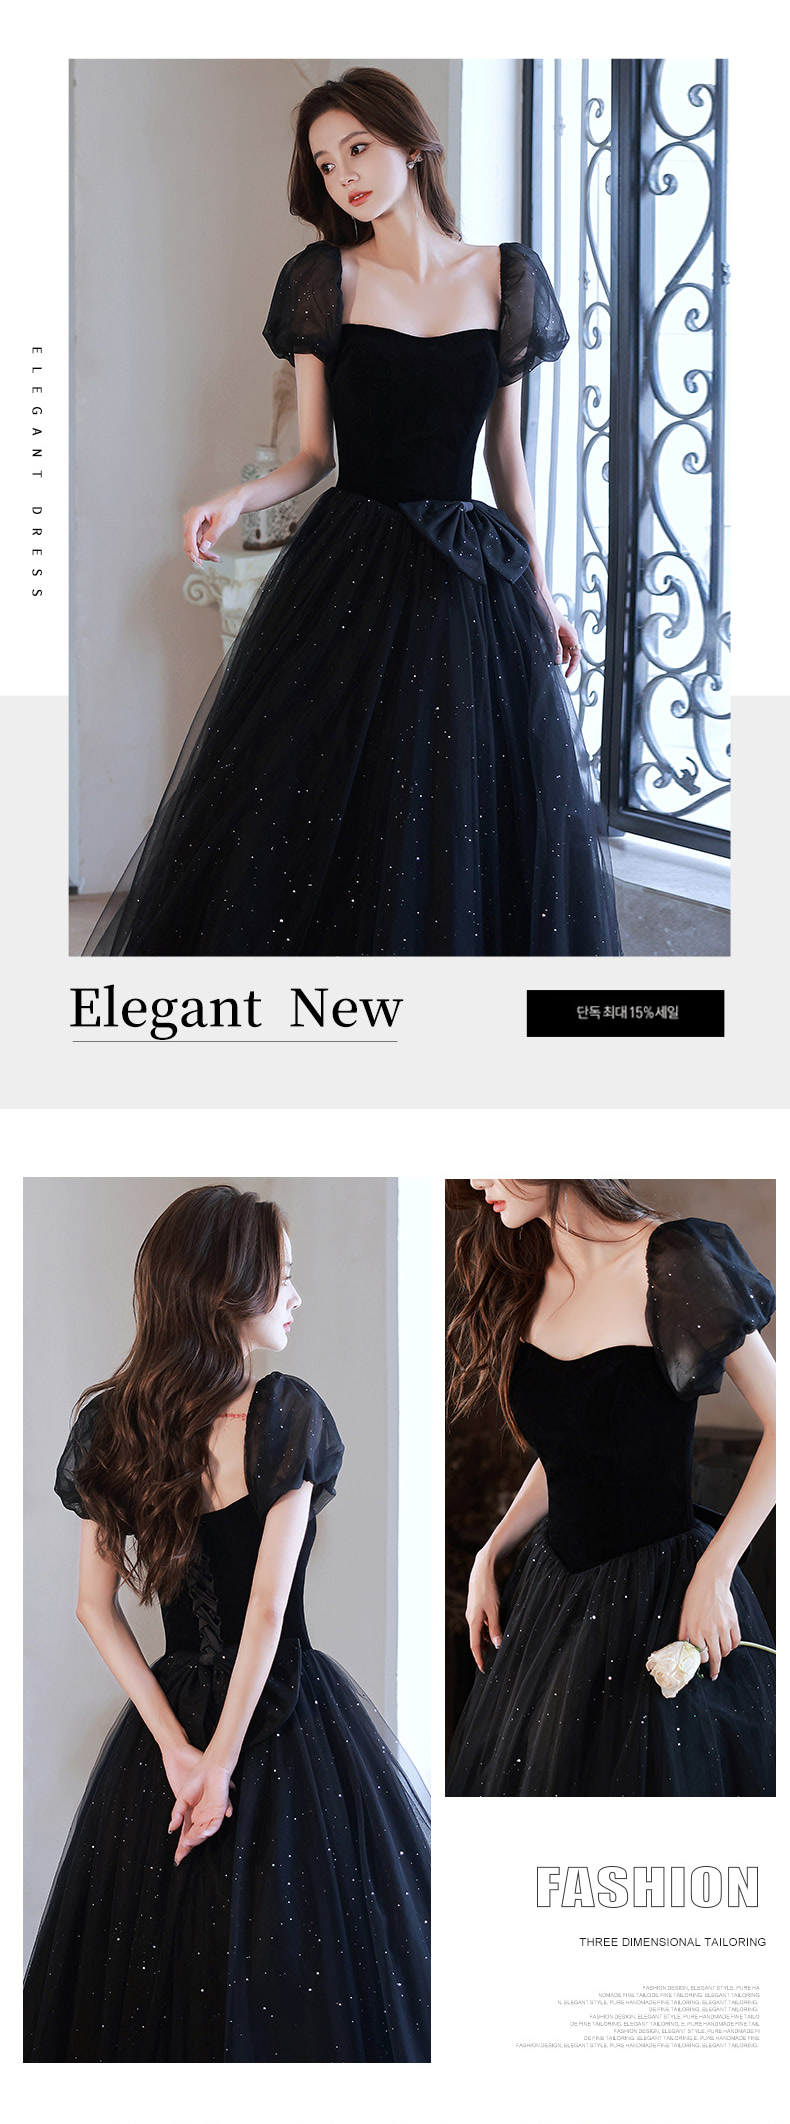 Black-Prom-Evening-Maxi-Dress-Homecoming-Outfit-with-Bowknot12.jpg